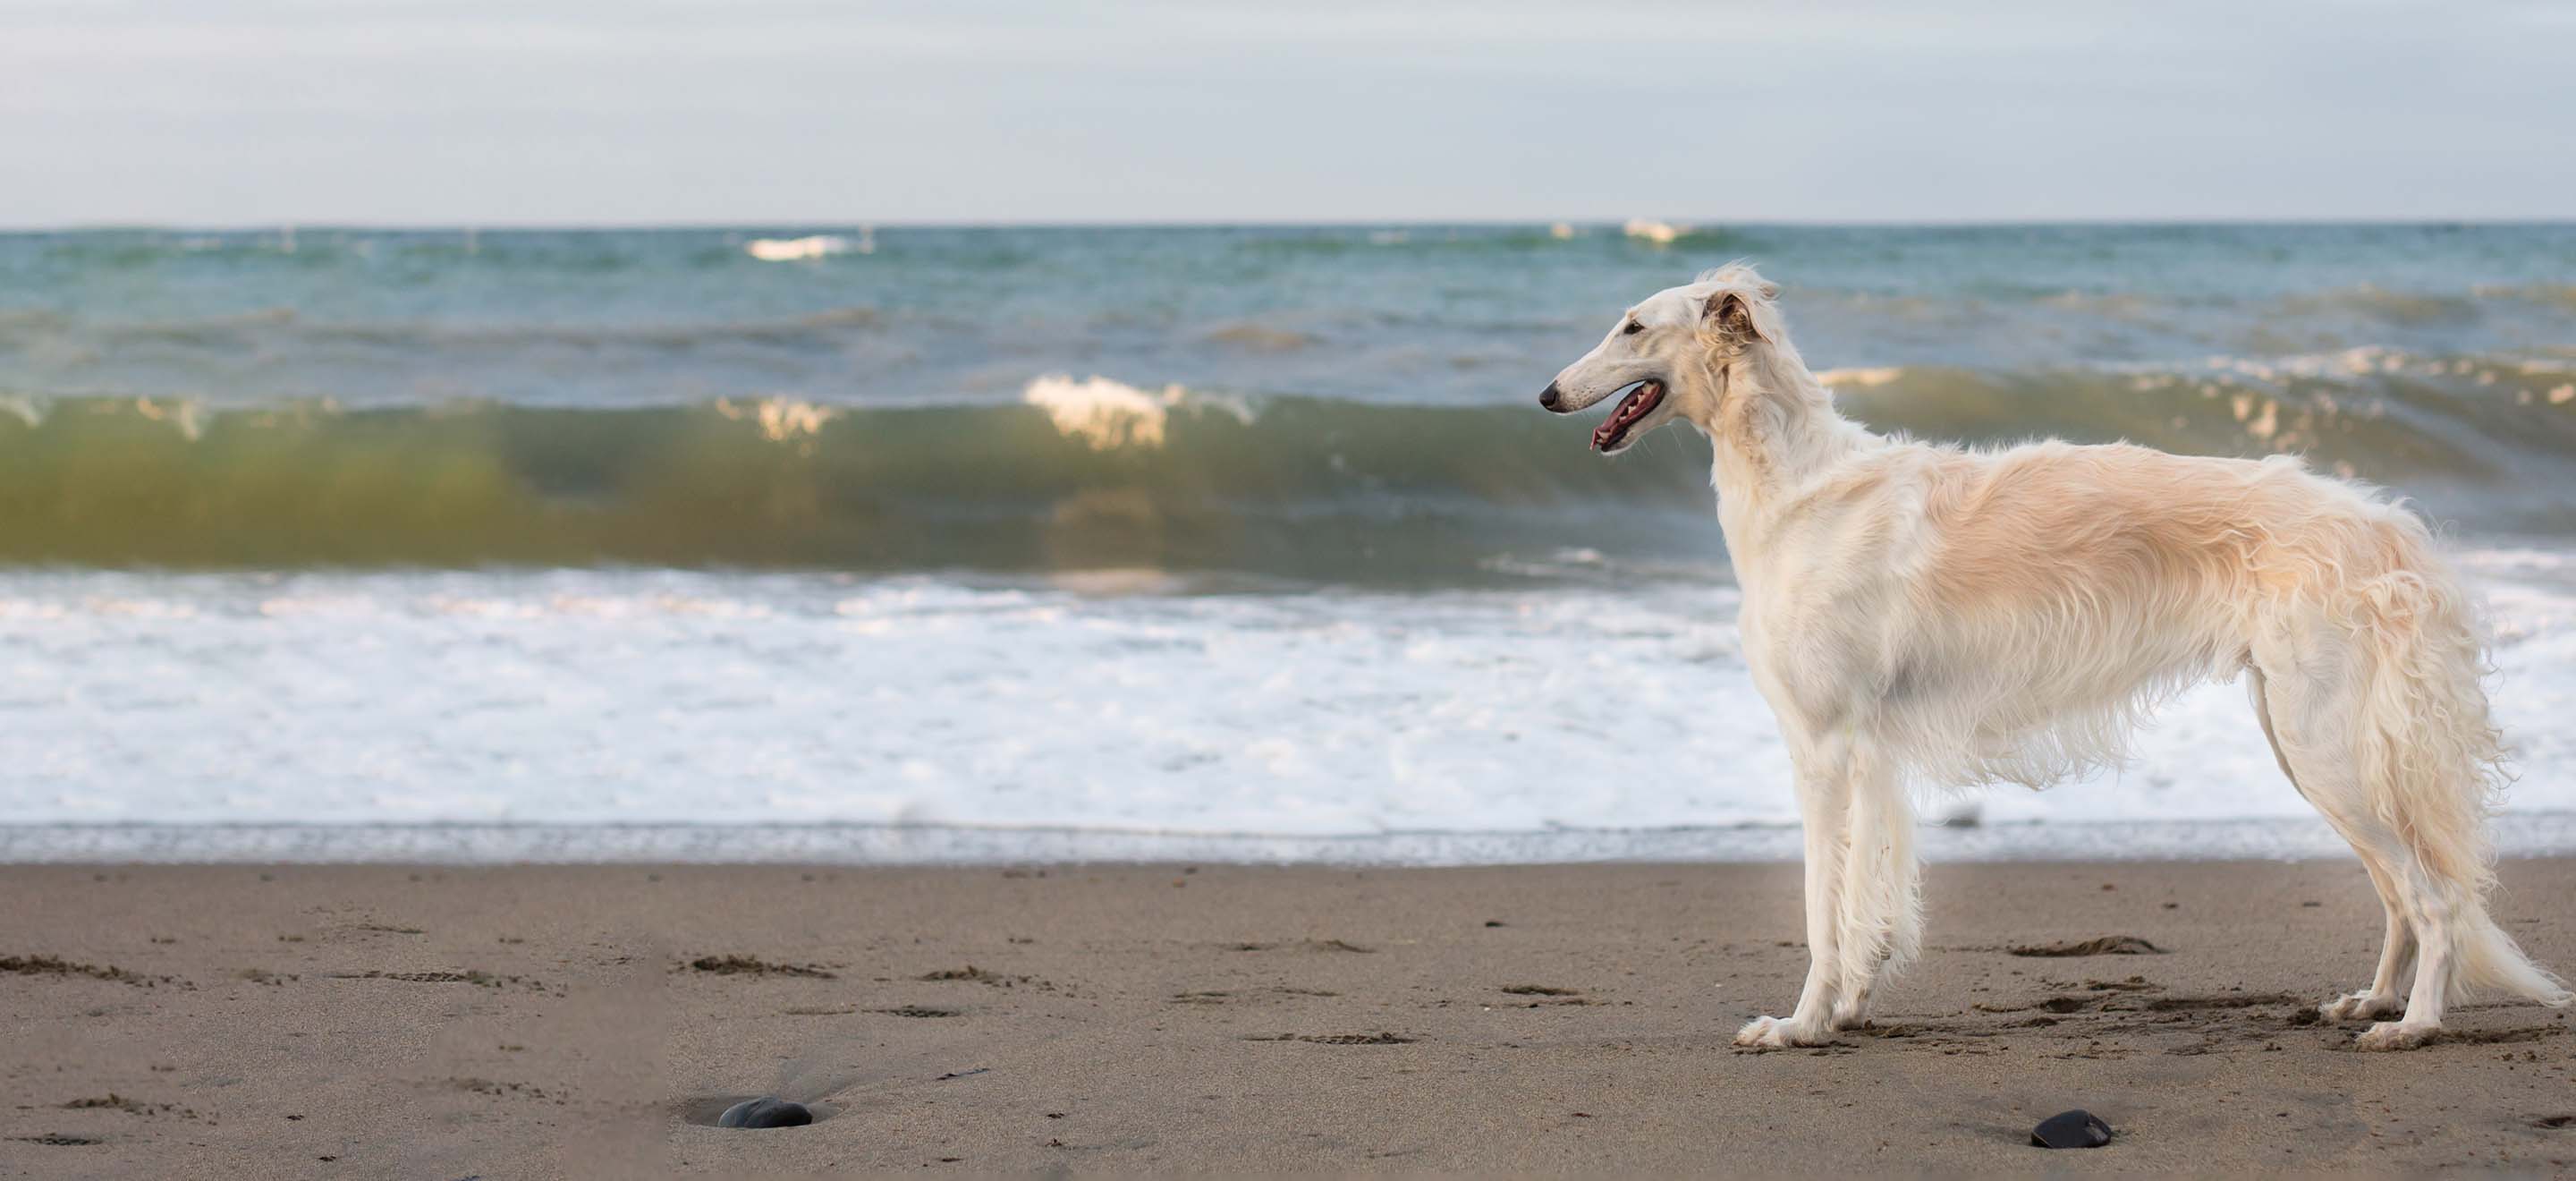 White Borzoi dog standing on the sand at the beach in front of the ocean image